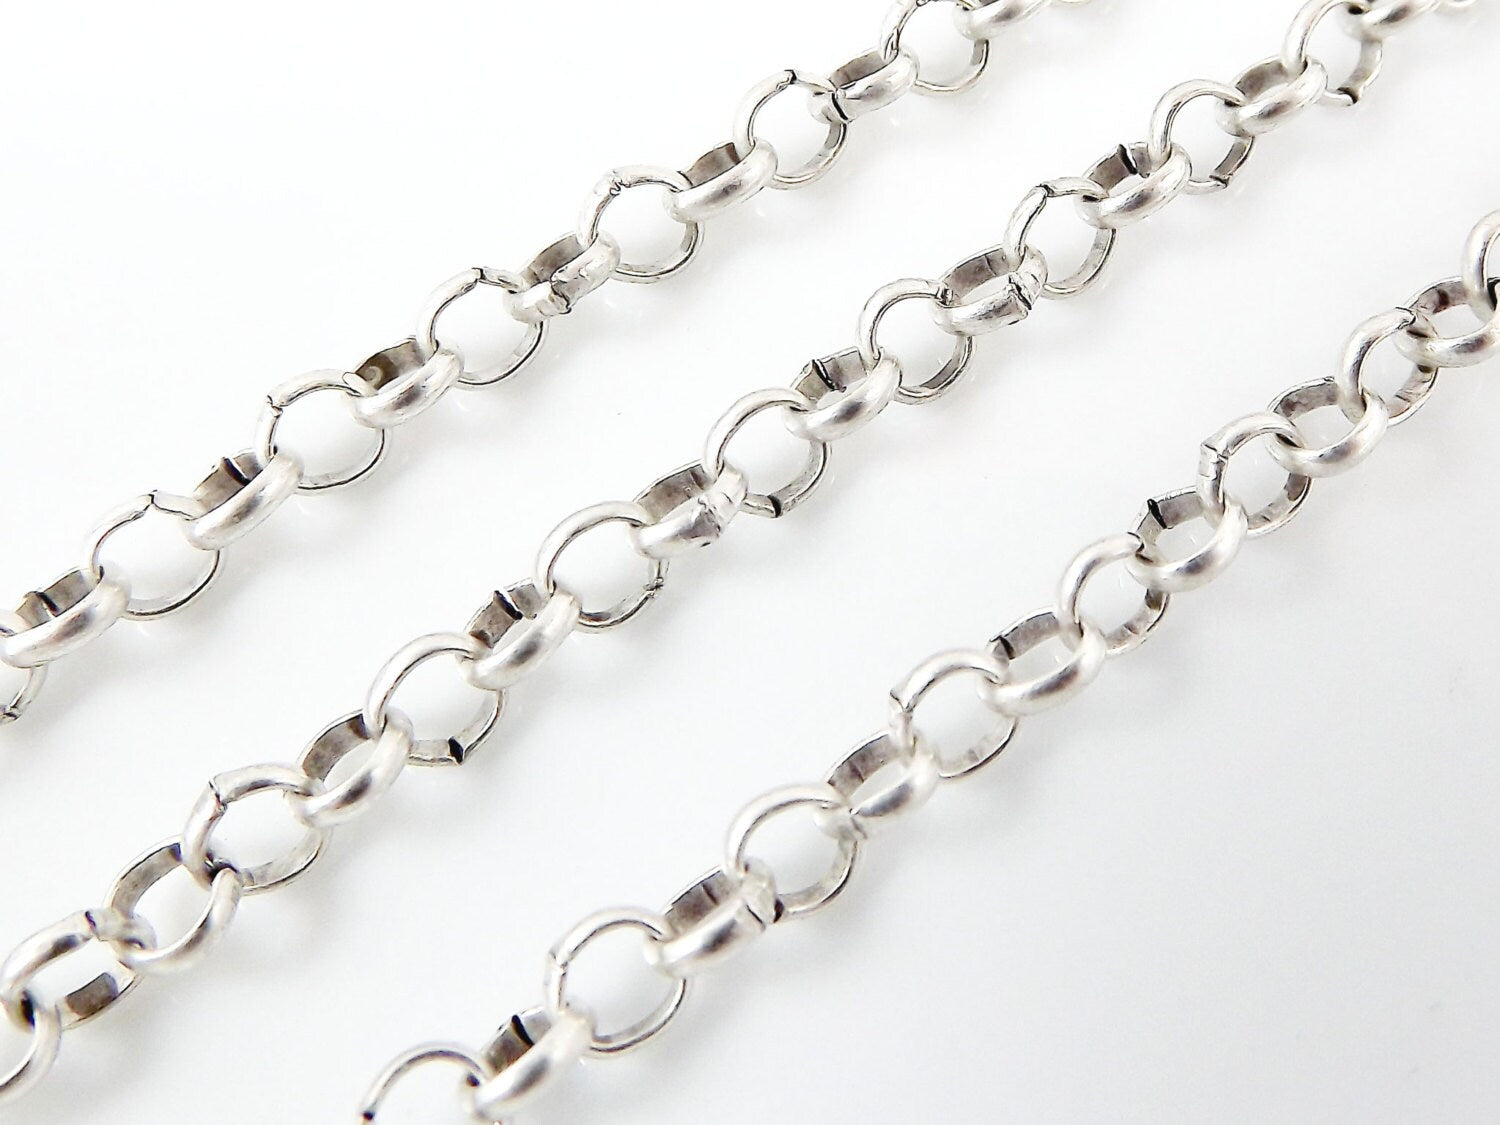 3.5mm Silver Rolo Chain, Round Link Jewelry Making Chain, Matte Antique Silver Plated, 1 Meter  or 3.3 Feet